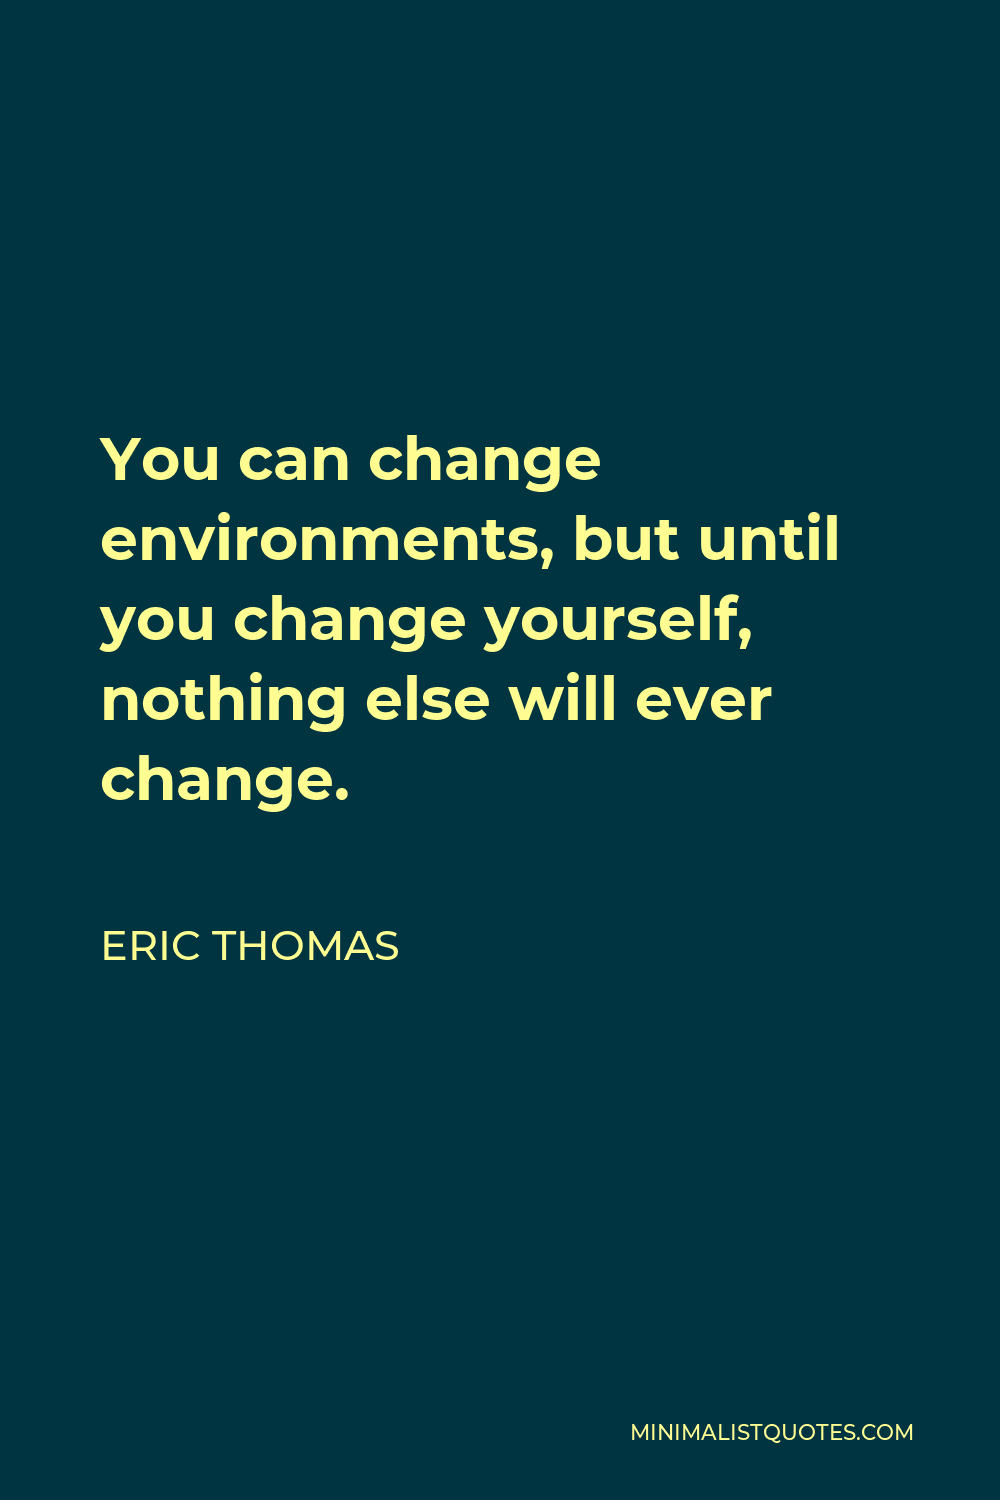 Eric Thomas Quote - You can change environments, but until you change yourself, nothing else will ever change.